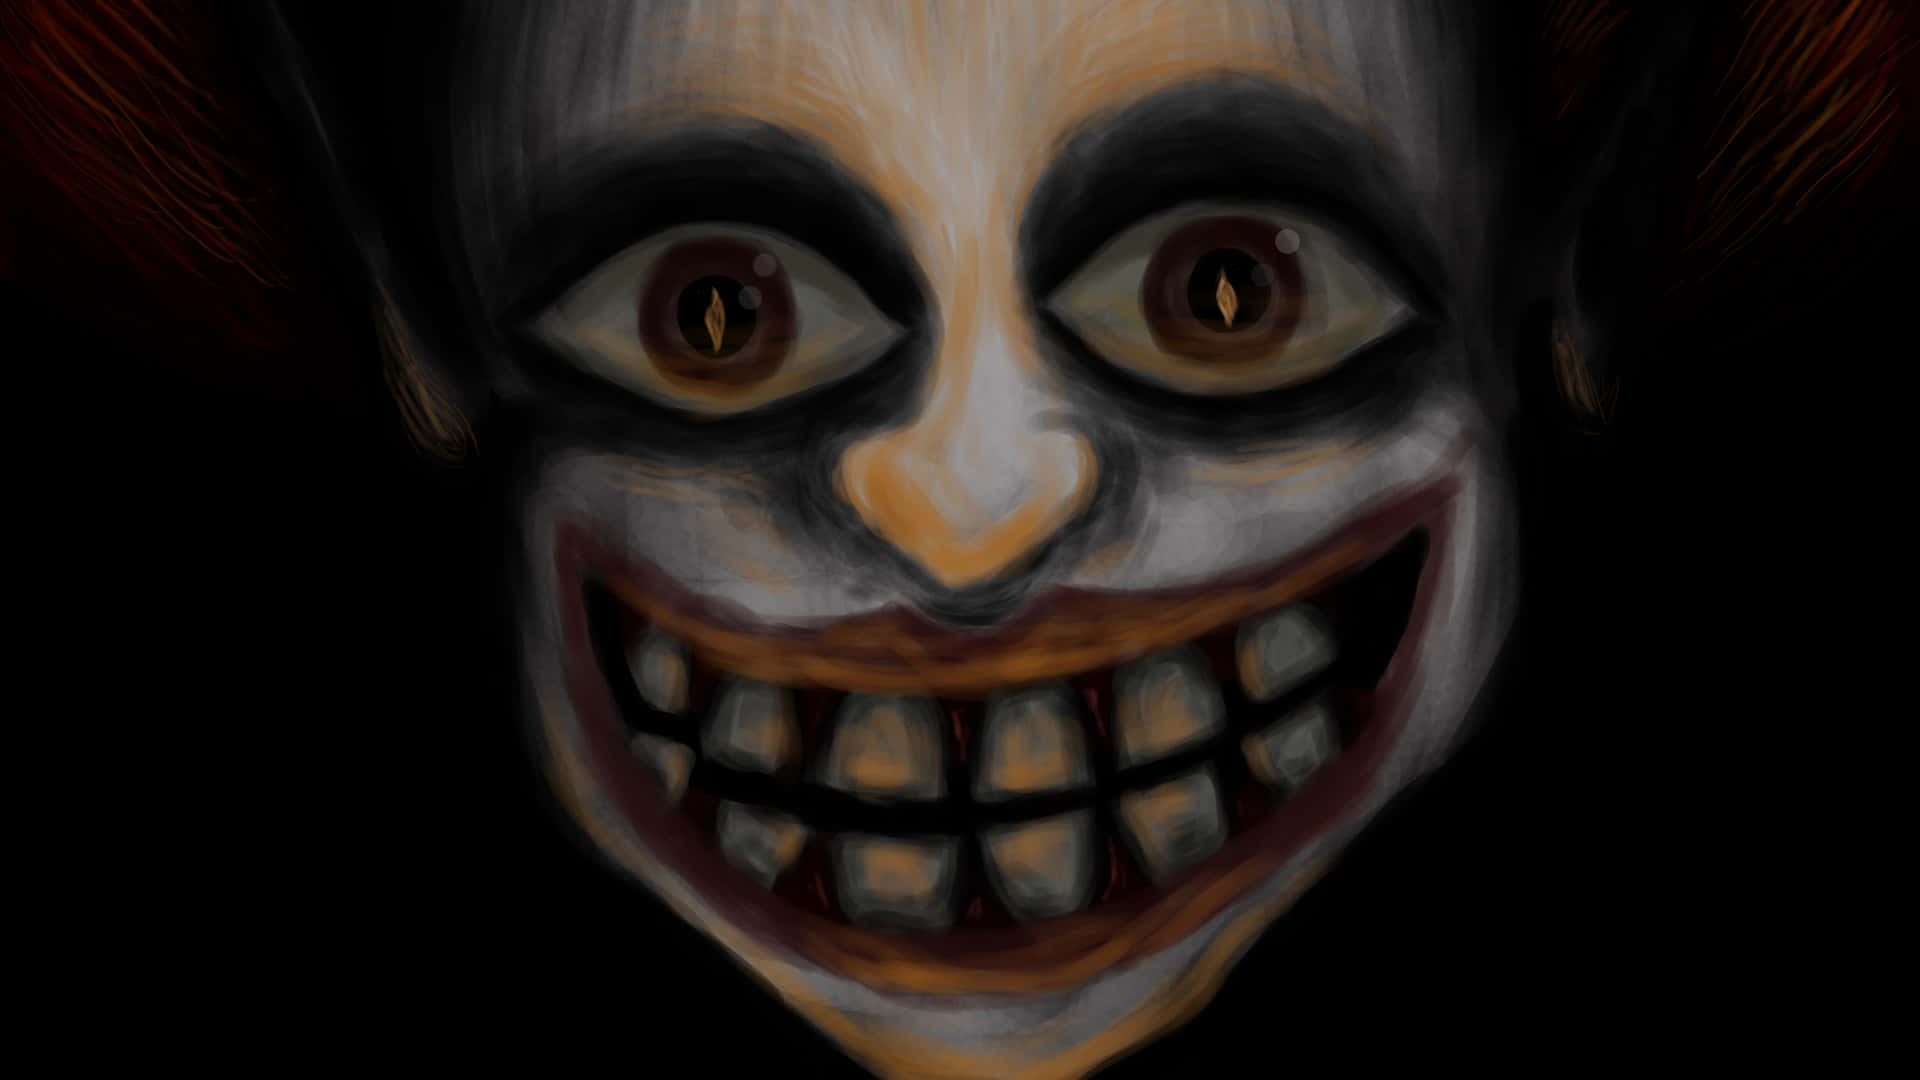 A Scary Clown Face With A Black Background Wallpaper